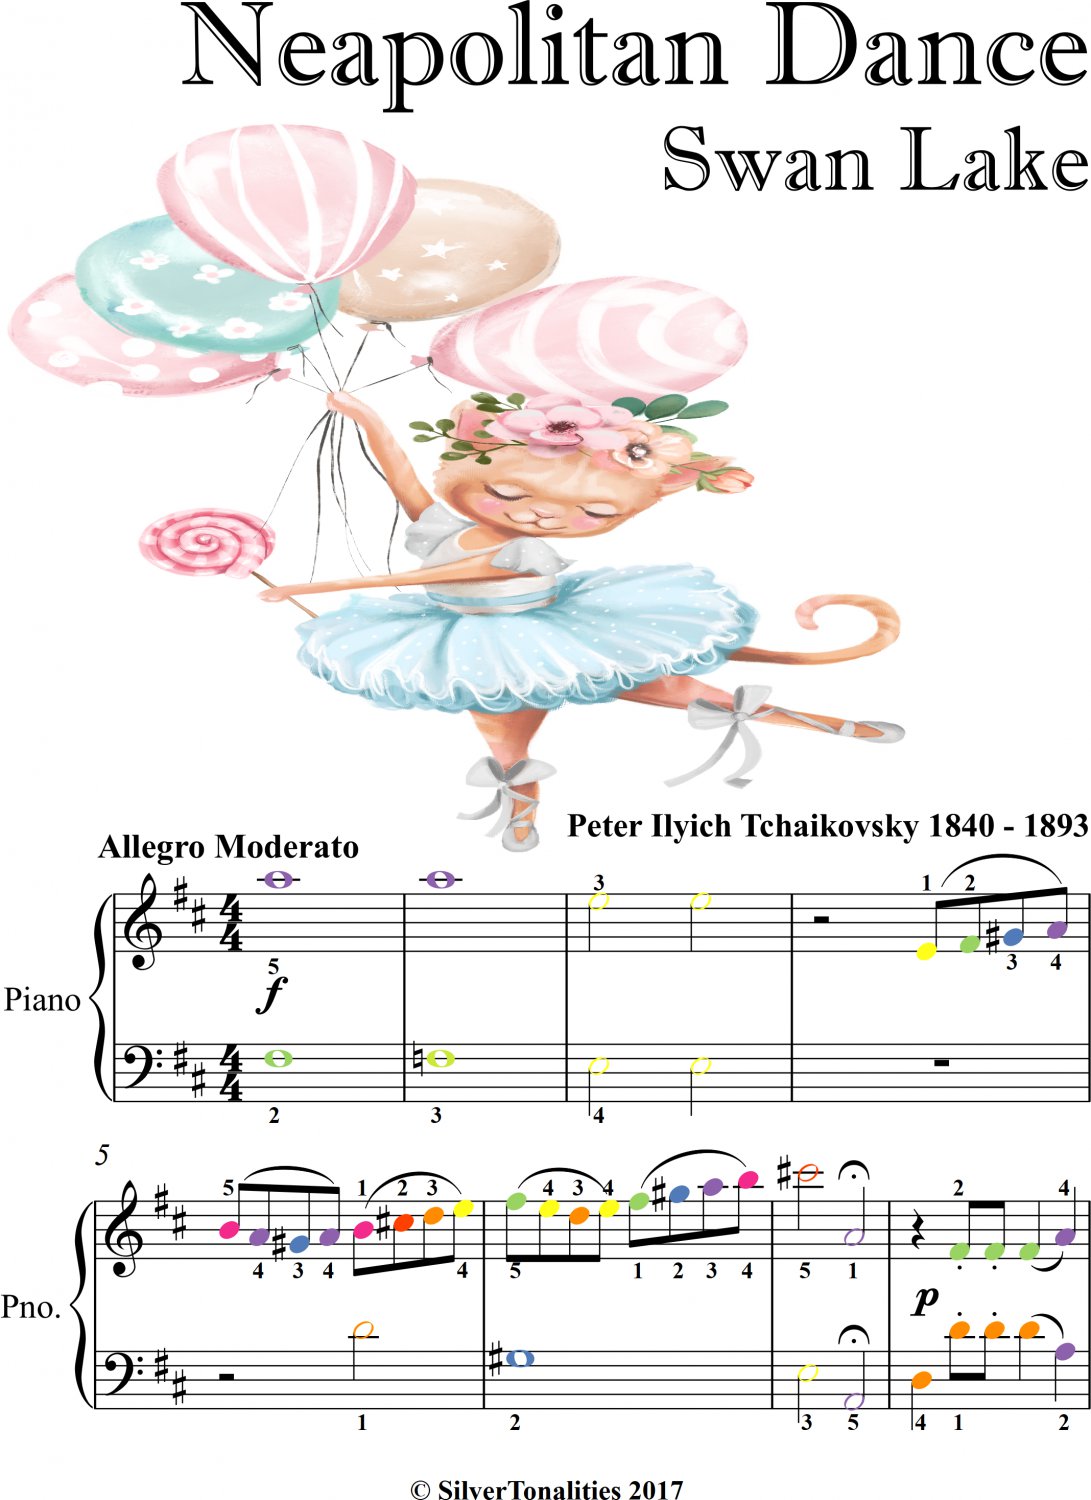 The Neapolitan Dance Swan Lake for Easy Piano Sheet Music with Colored Notes